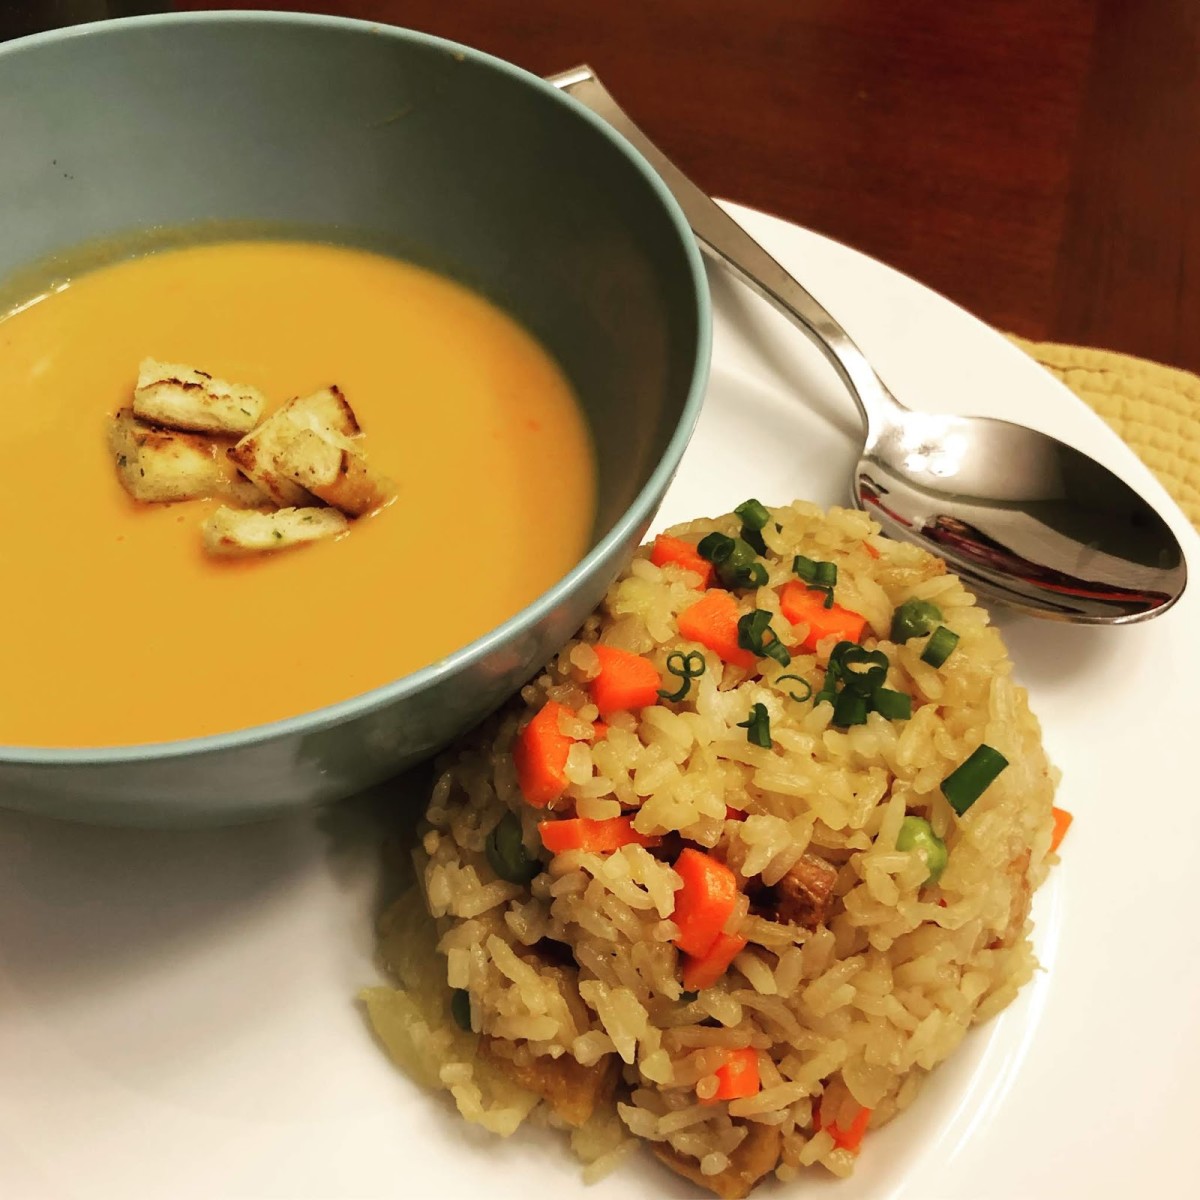 Egg-free veggie fried rice pictured with a butternut squash soup.